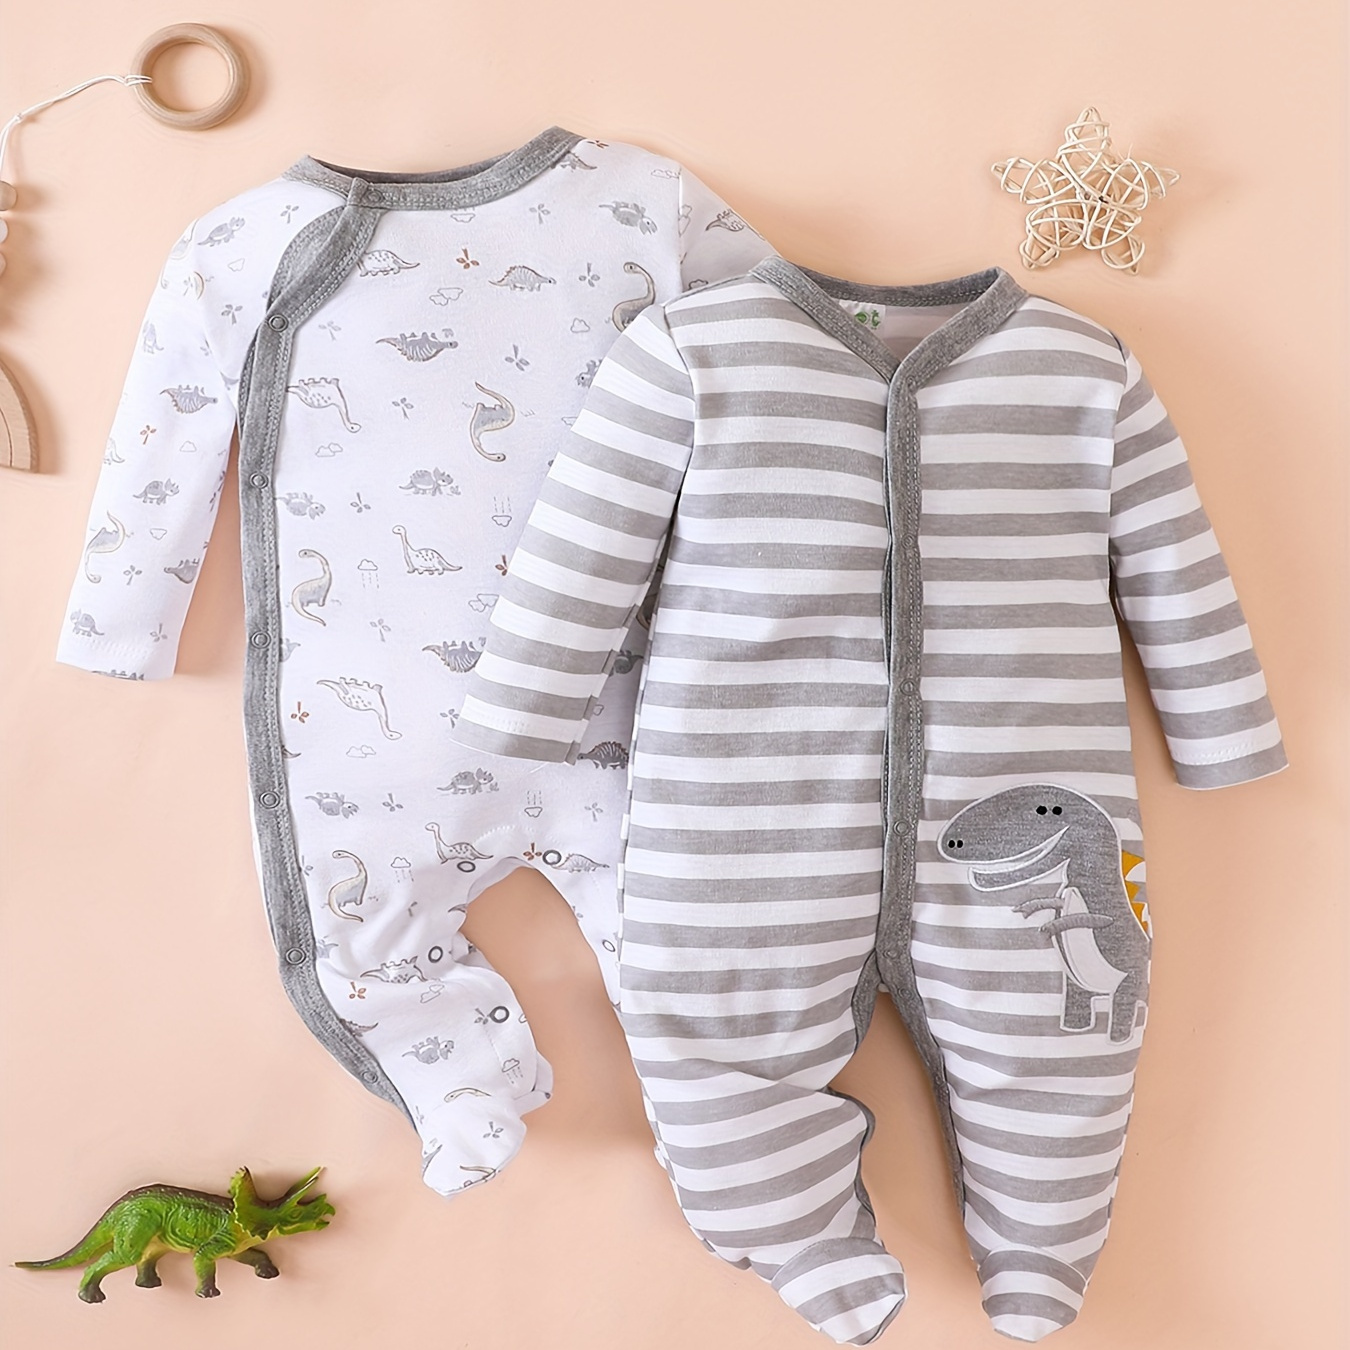 

2pcs Baby Cute Graphic Cotton Comfy Bodysuit, Long Sleeve Onesies Pajamas, Kids Clothes Autumn And Winter